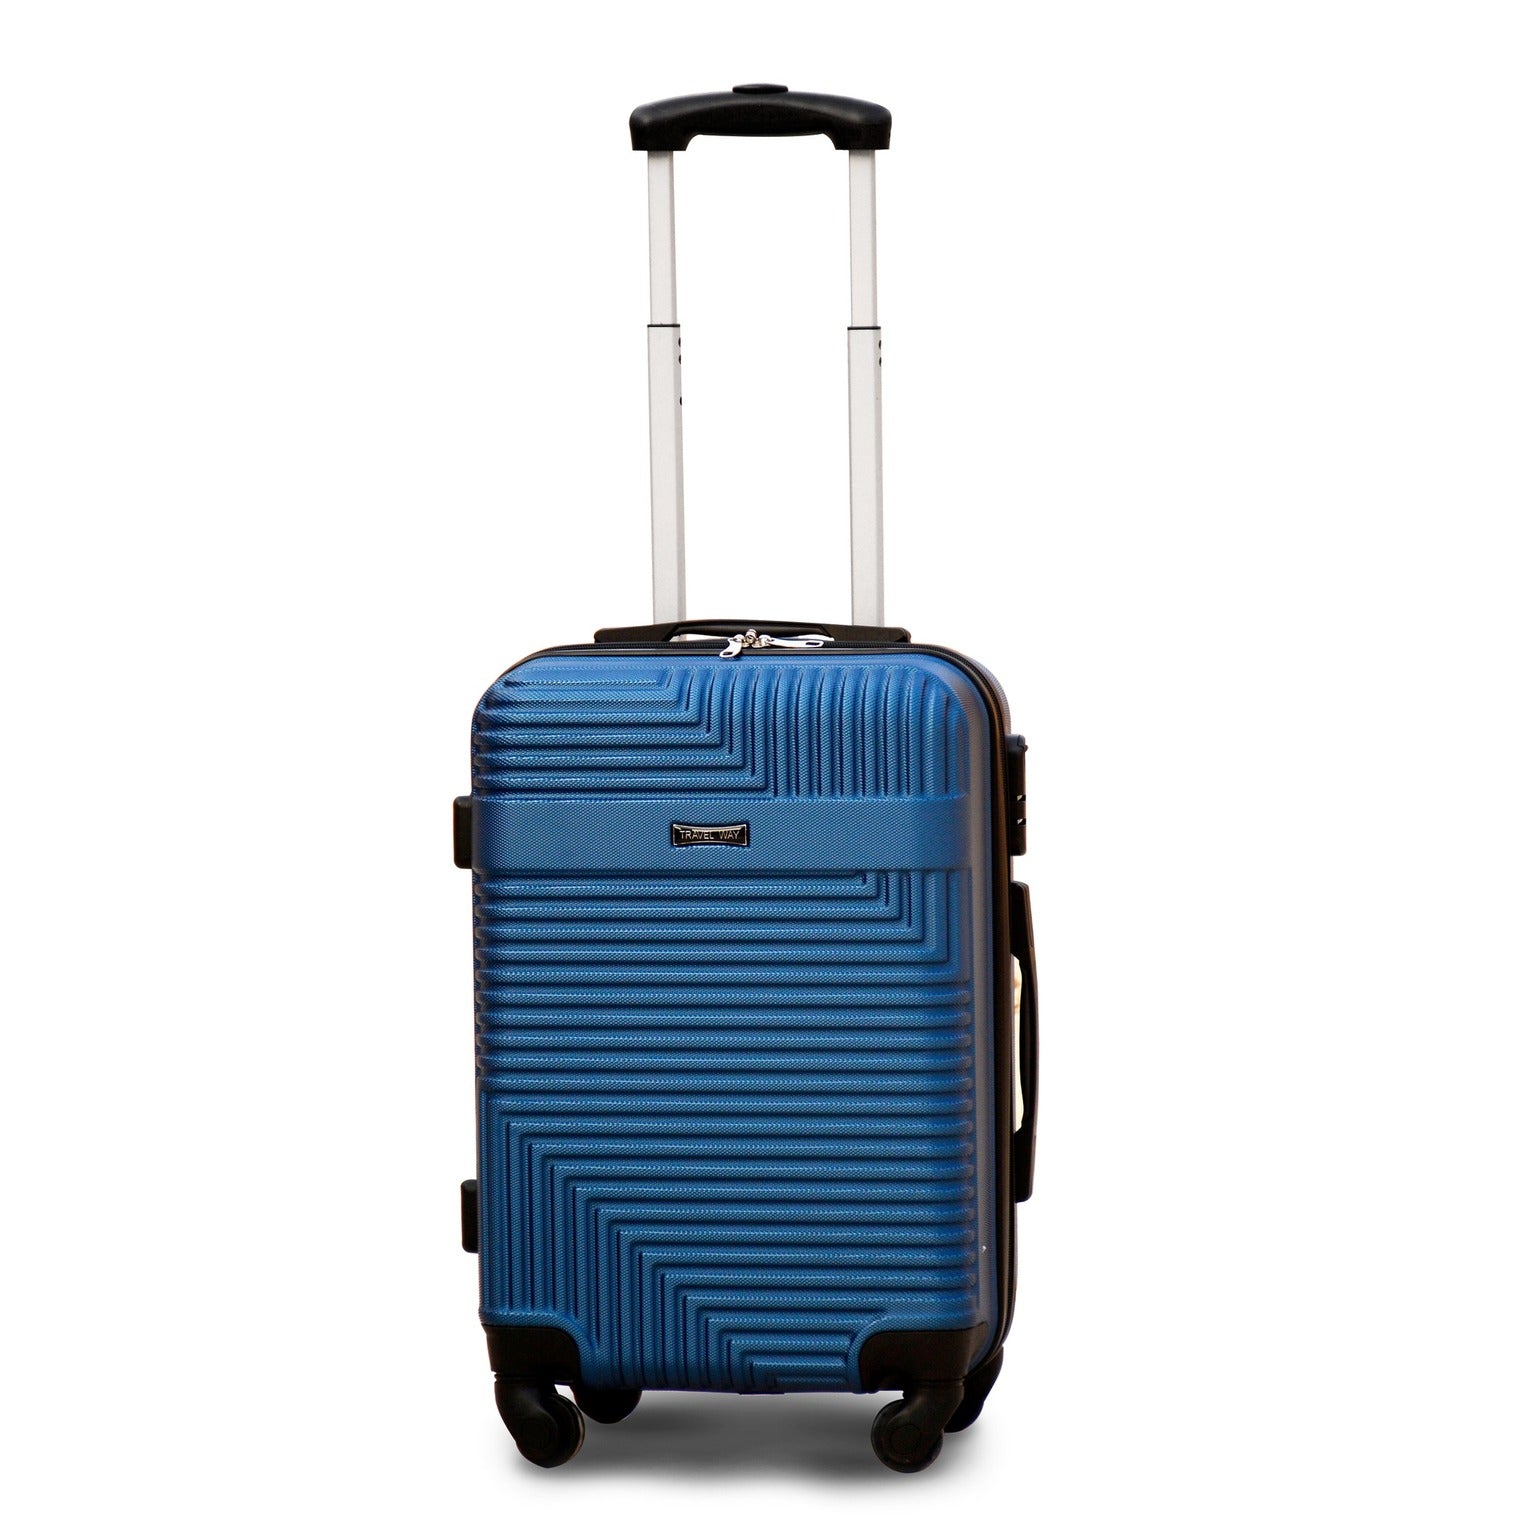 20" Blue Colour Travel Way ABS Luggage Lightweight Carry On Trolley Bag